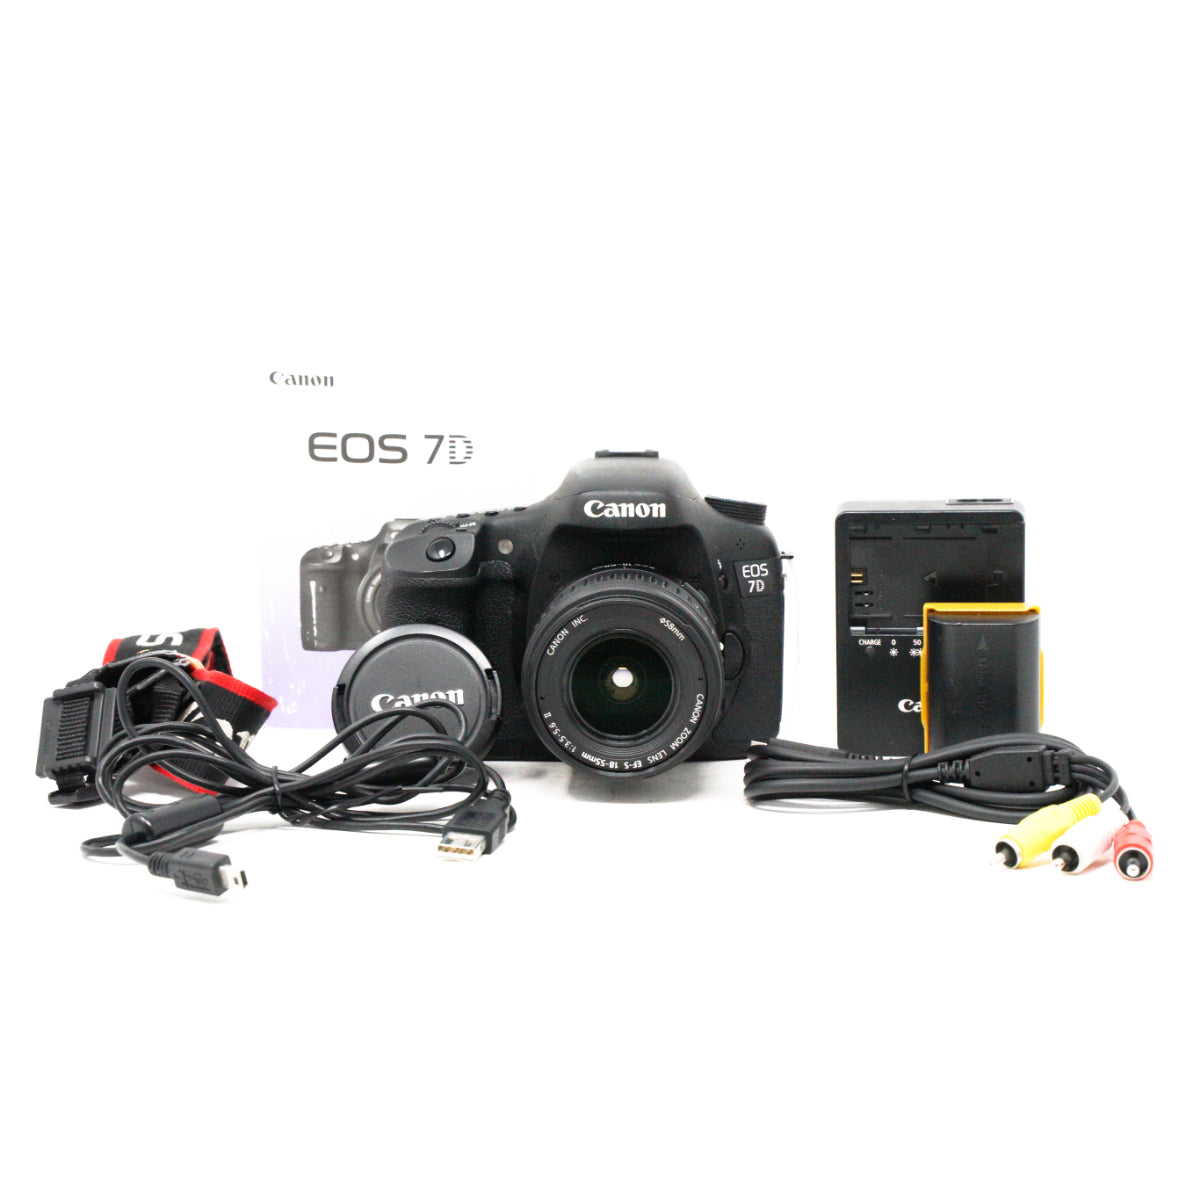 Used Canon EOS 7D Camera with 18-55 II Kit Lens